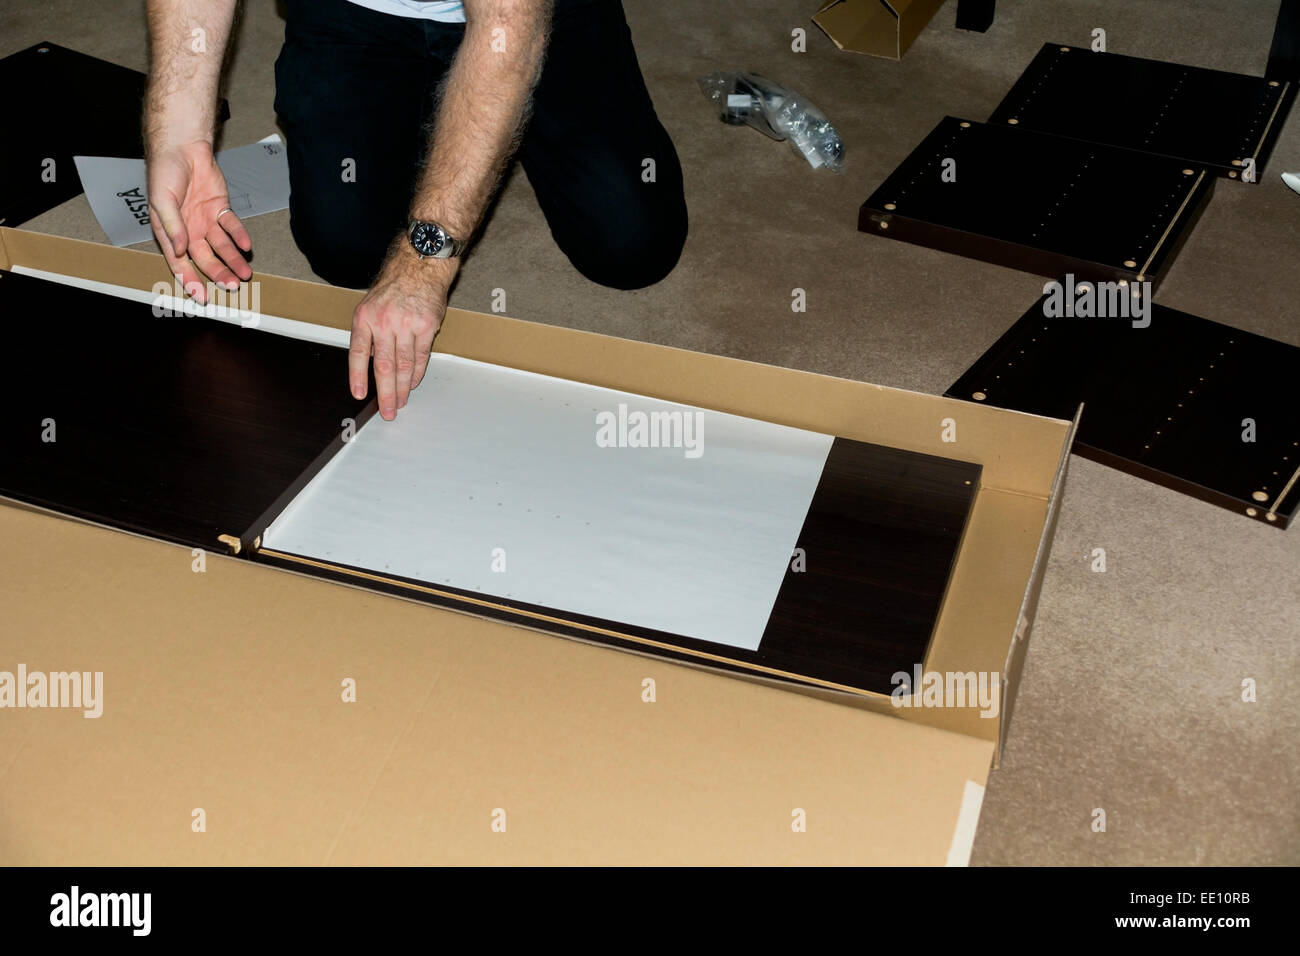 This man is assembling flat-packed furniture. Stock Photo